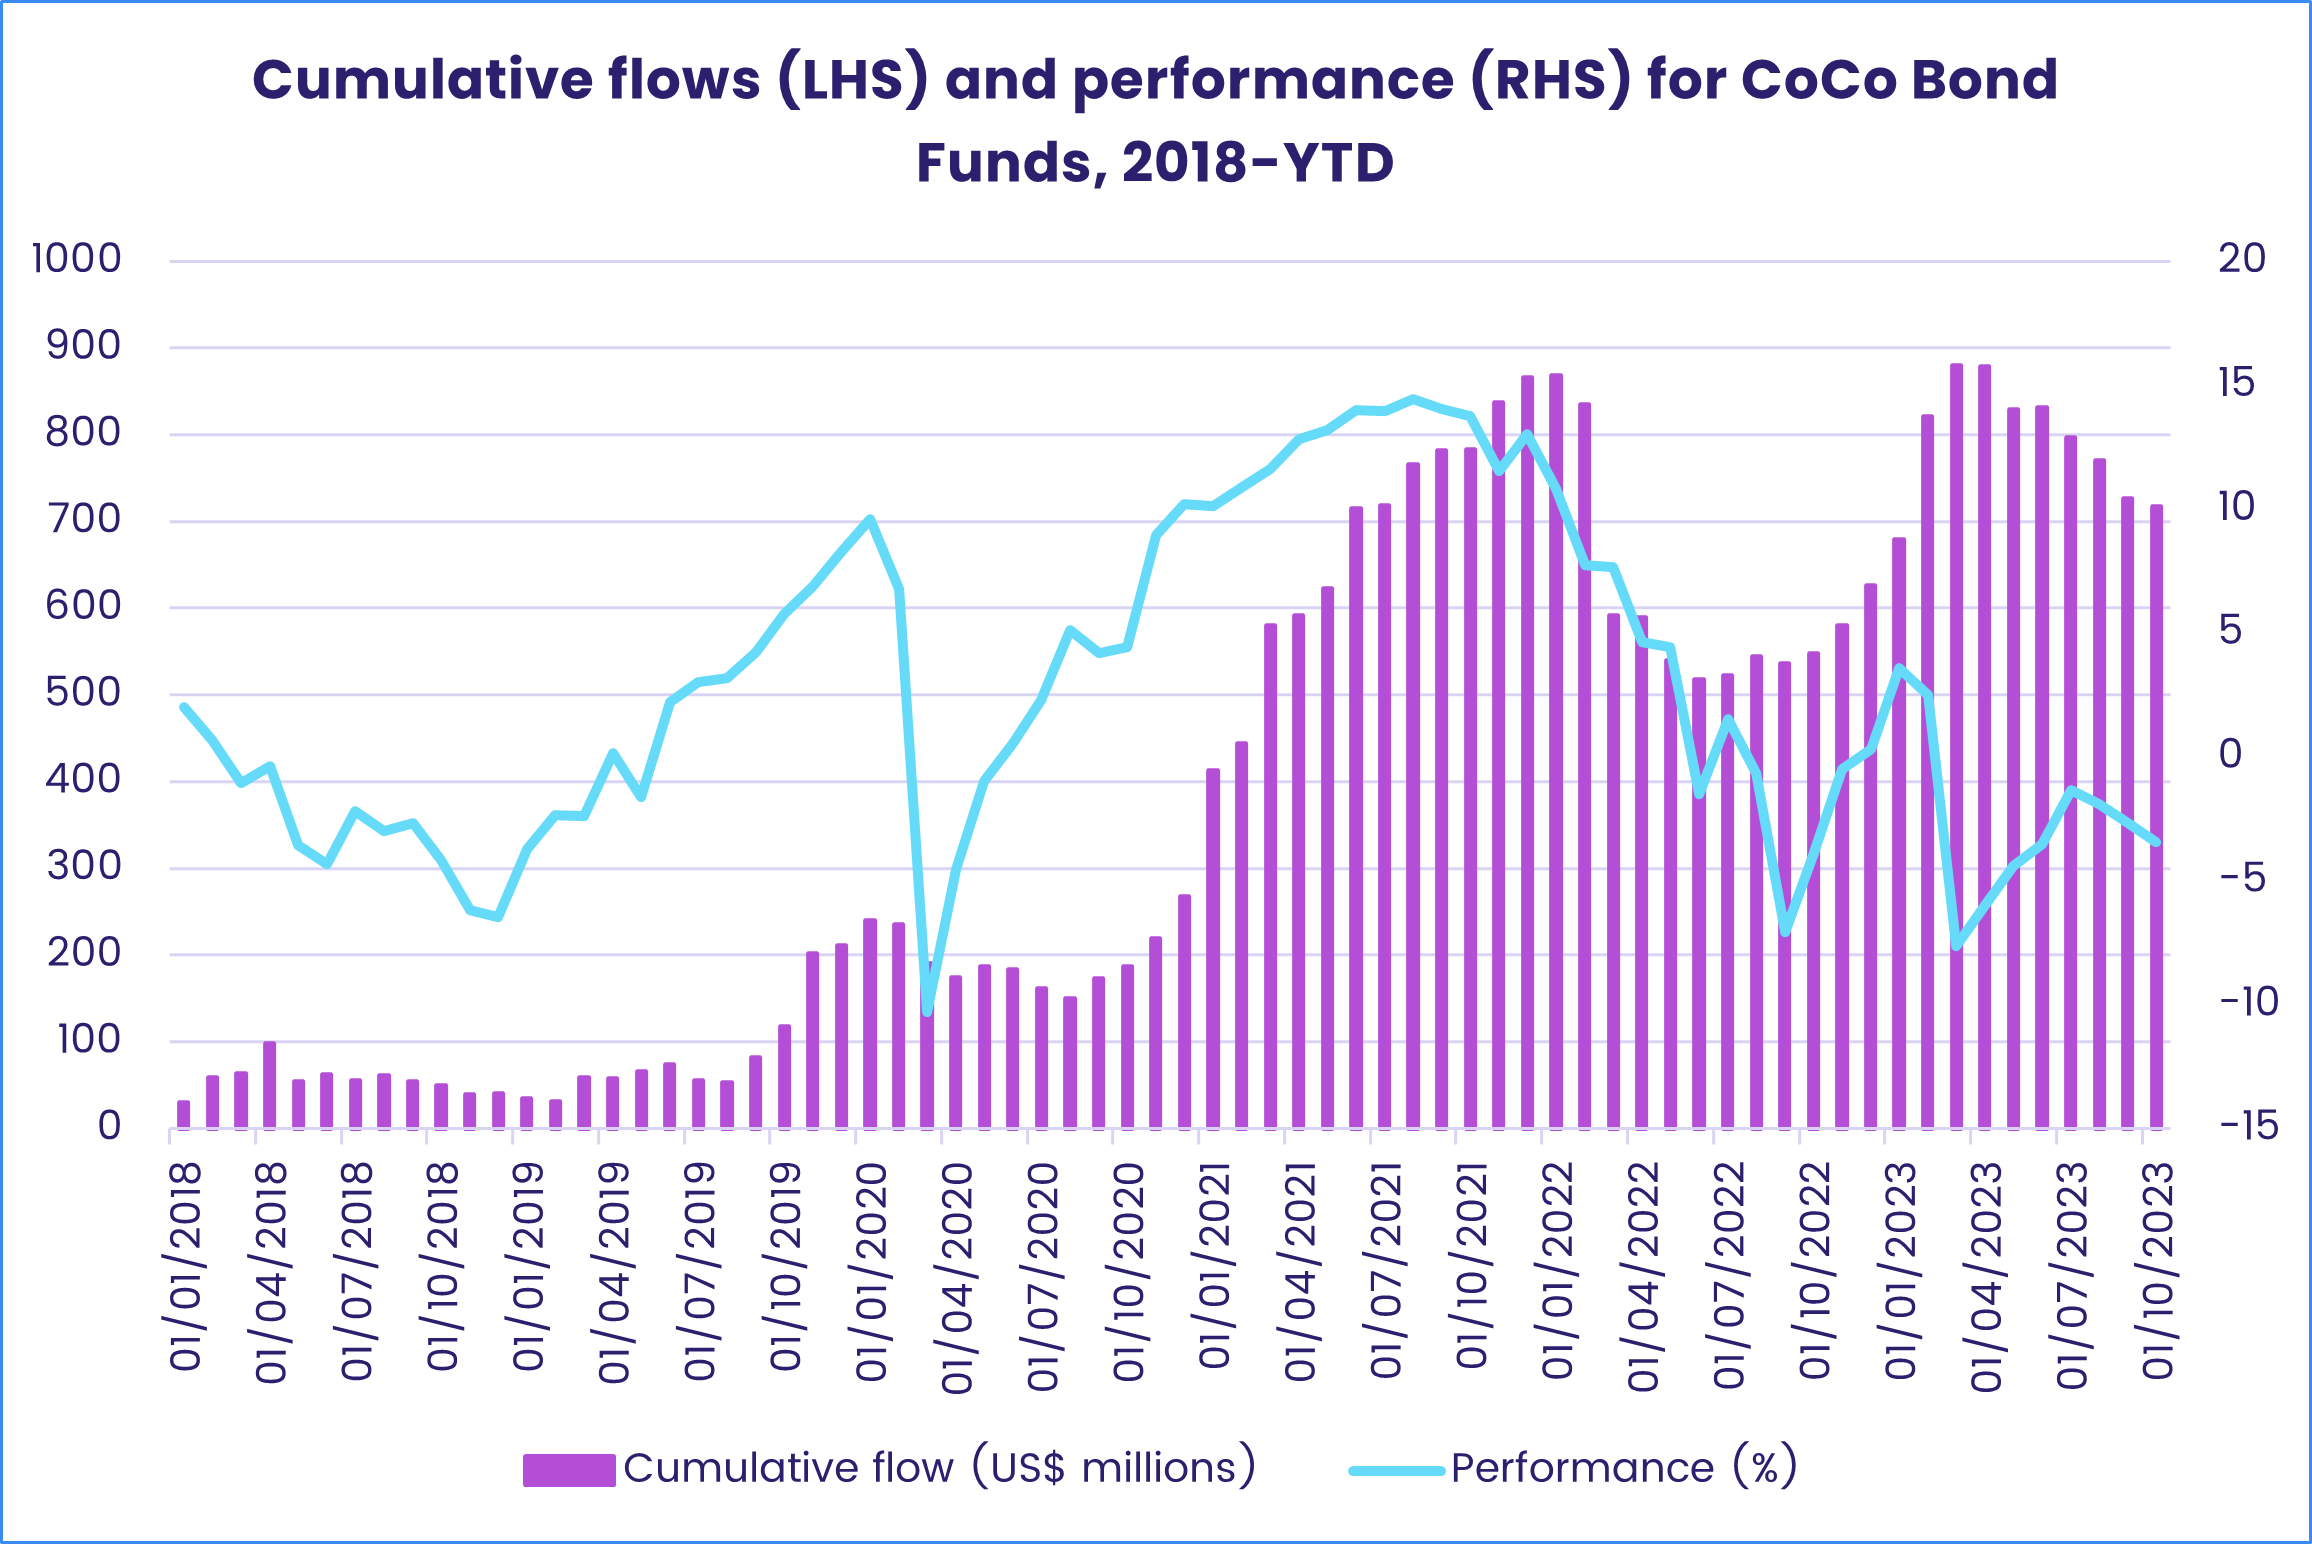 Image of a chart representing "Cumulative flows (LHS) and performance (RHS) for CoCo Bond Funds, 2018-YTD"